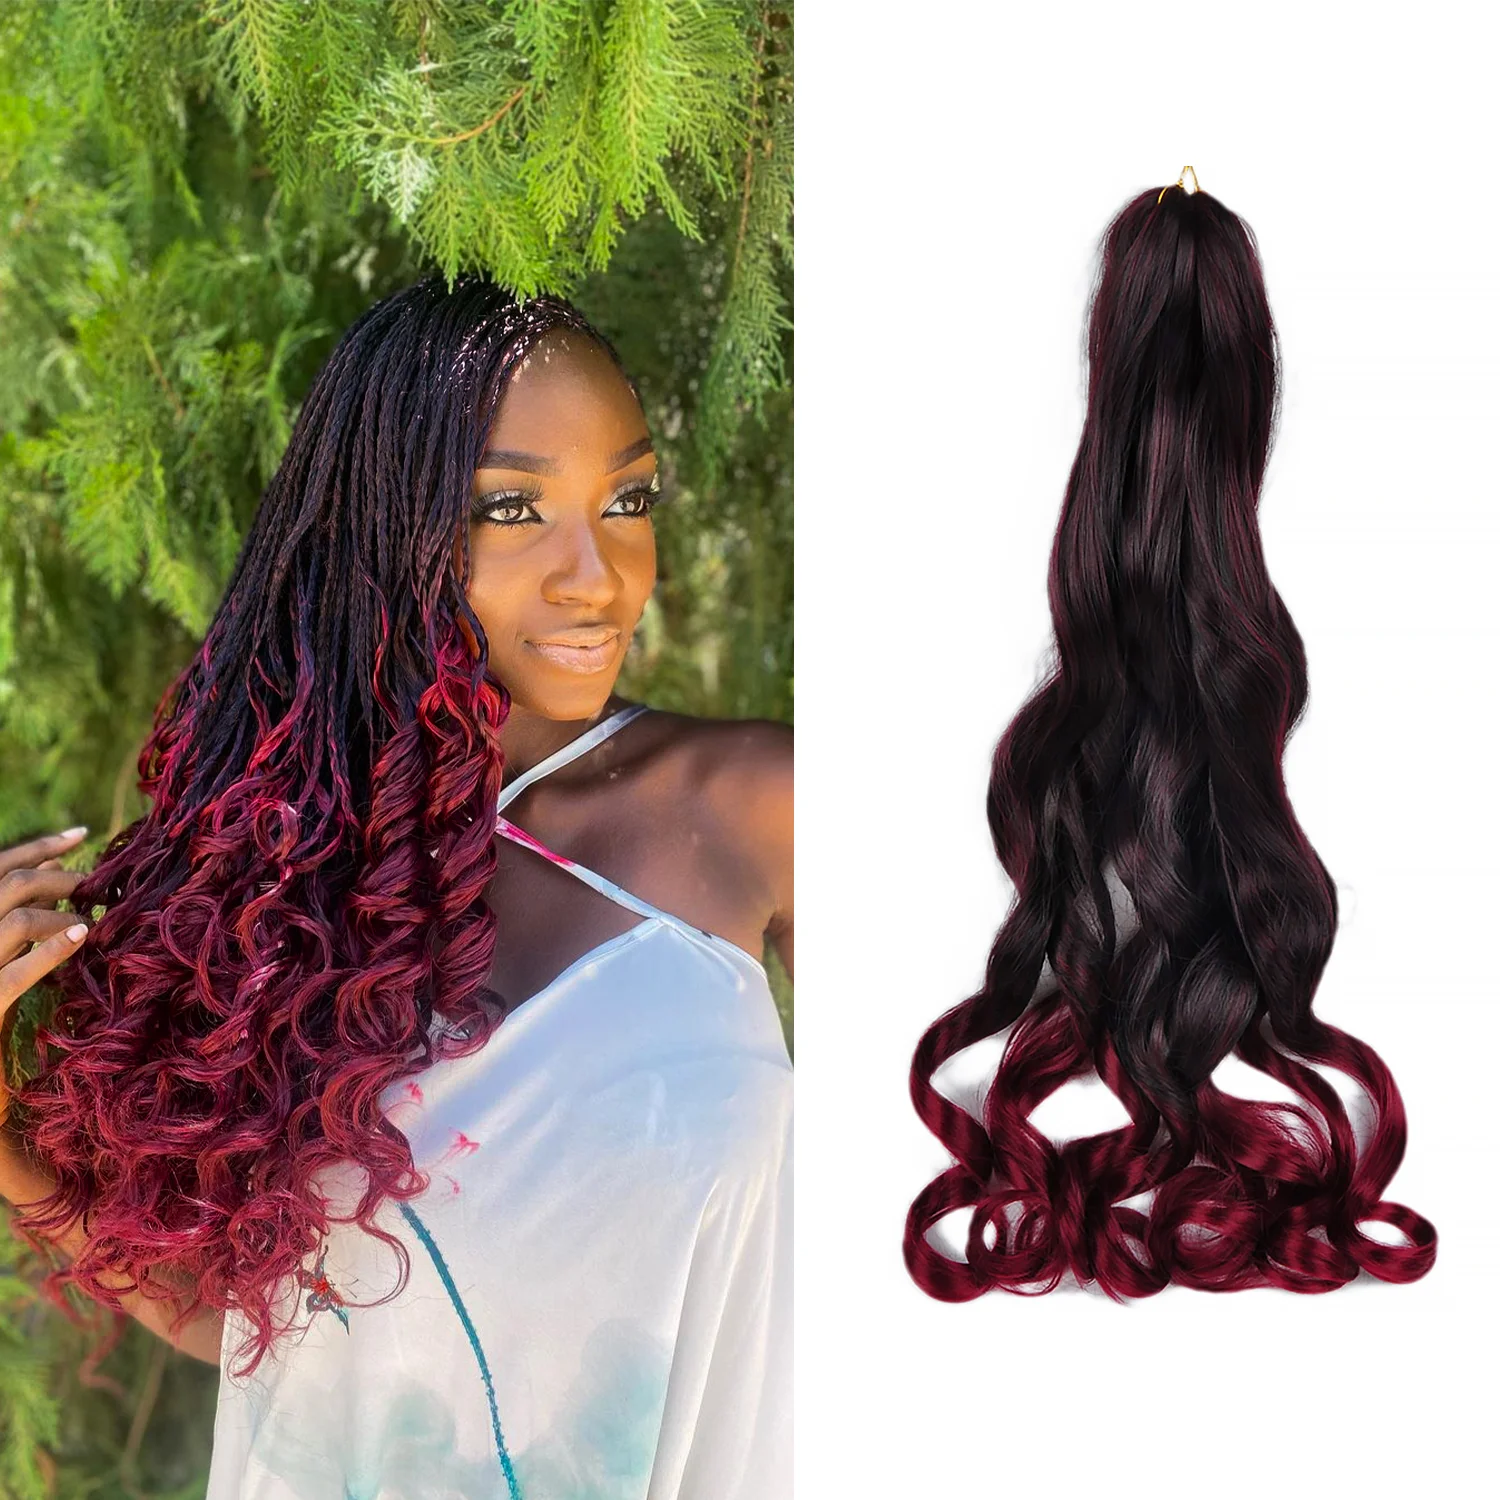 Goddess Braids Loose wave PonyStyle Crochet Braids Hair Braid Spiral French Curls Extension Synthetic Curly Braiding Hair